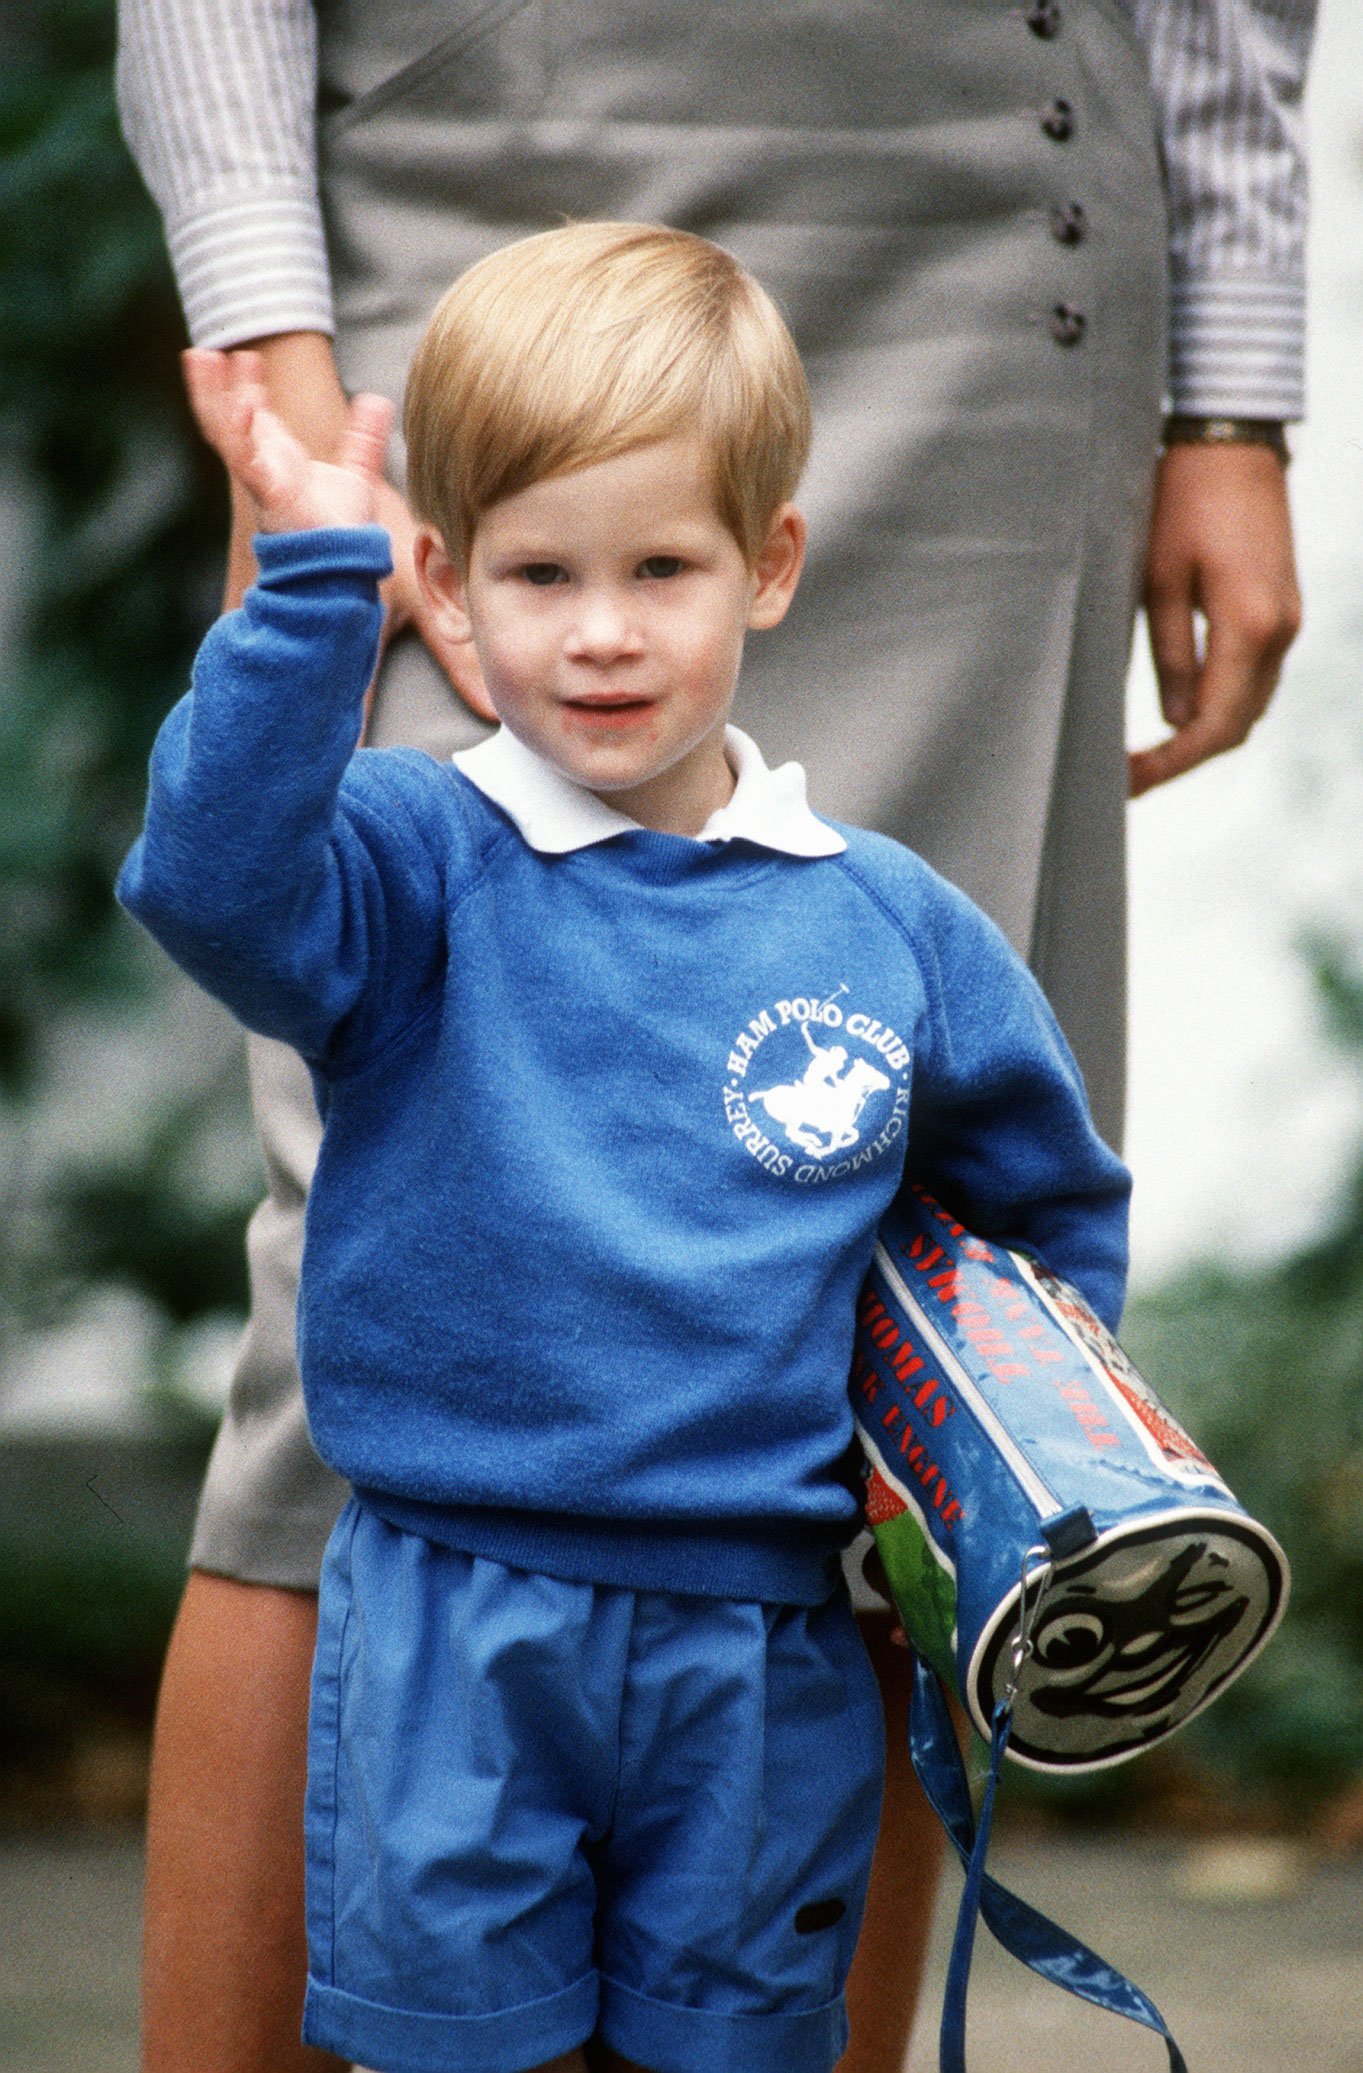 Prince Harry pictured on his first day at nursery school in Chepstow Villas in Kensington. | Source: Getty Images